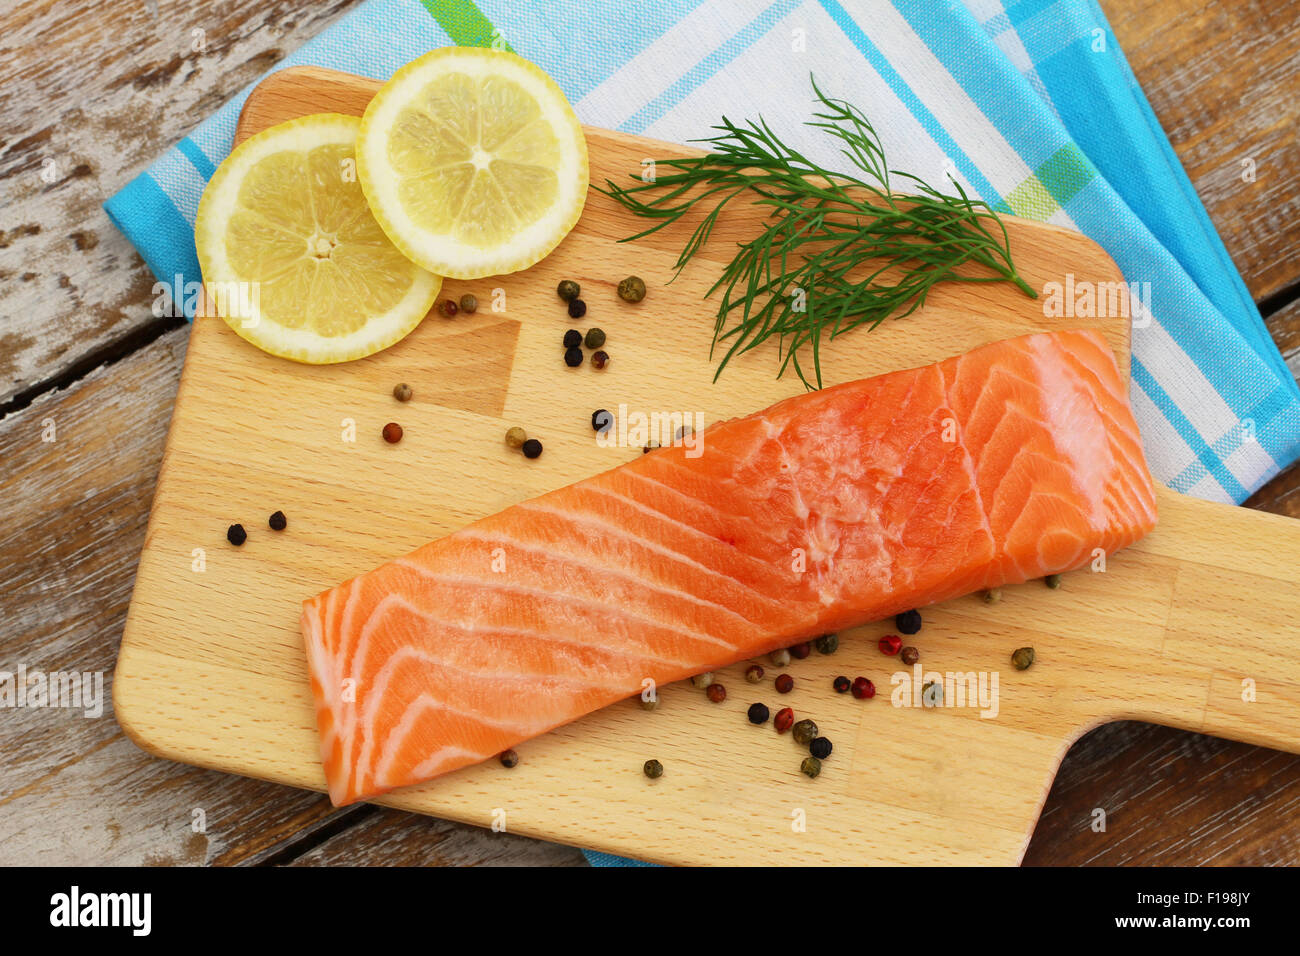 Raw salmon fillet on wooden board Stock Photo